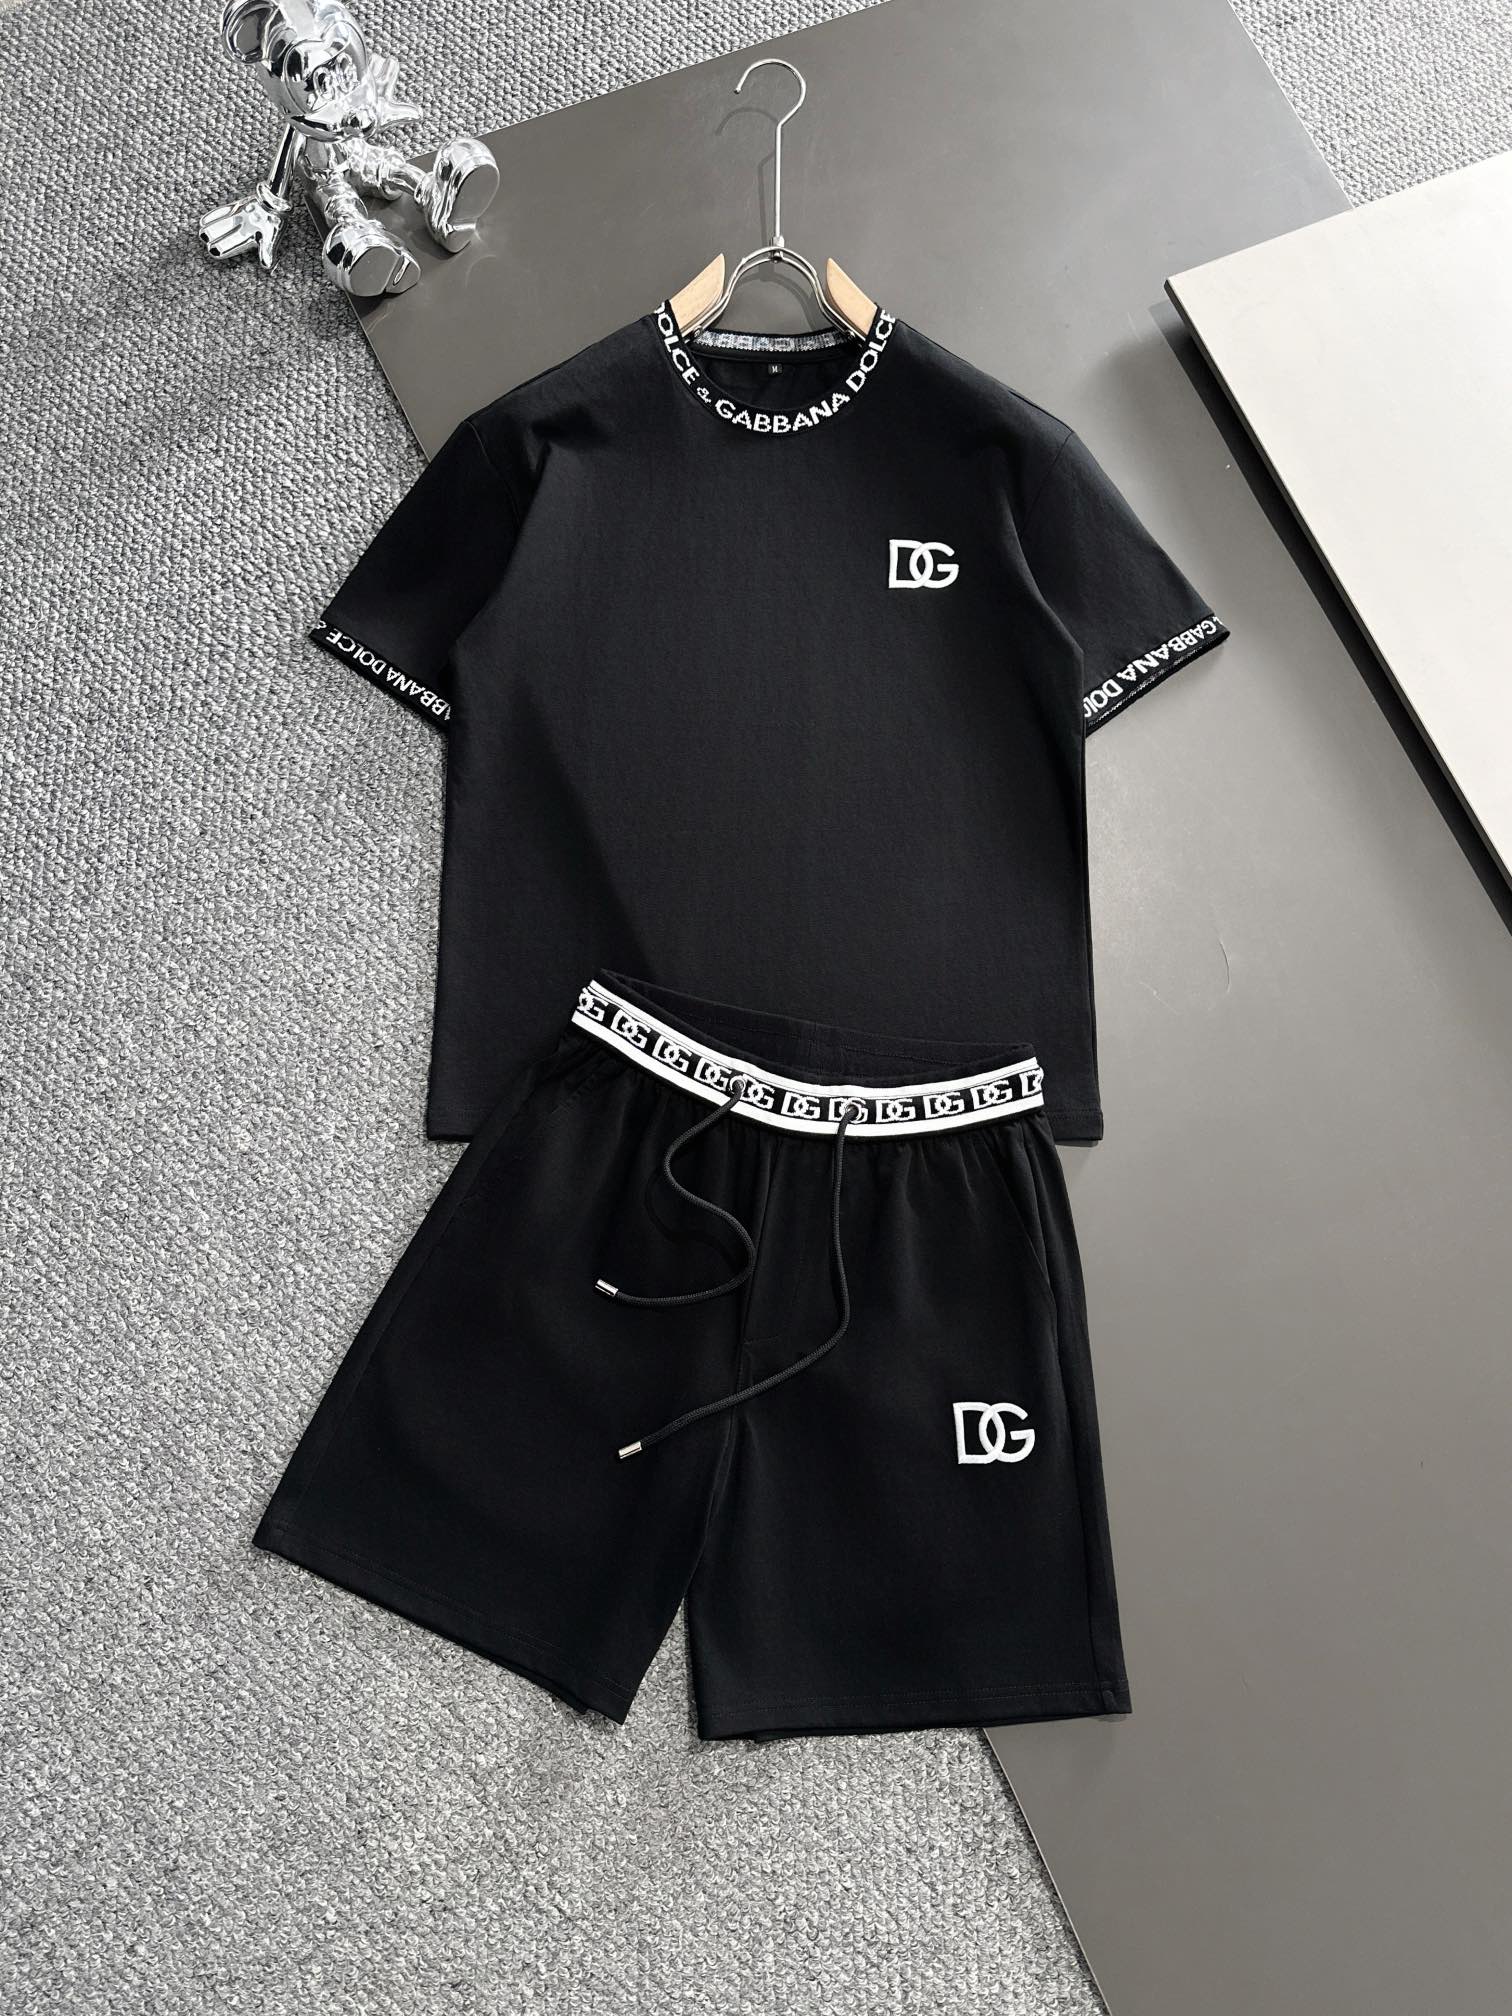 Dolce & Gabbana Clothing Shorts T-Shirt Two Piece Outfits & Matching Sets Cotton Fashion Short Sleeve